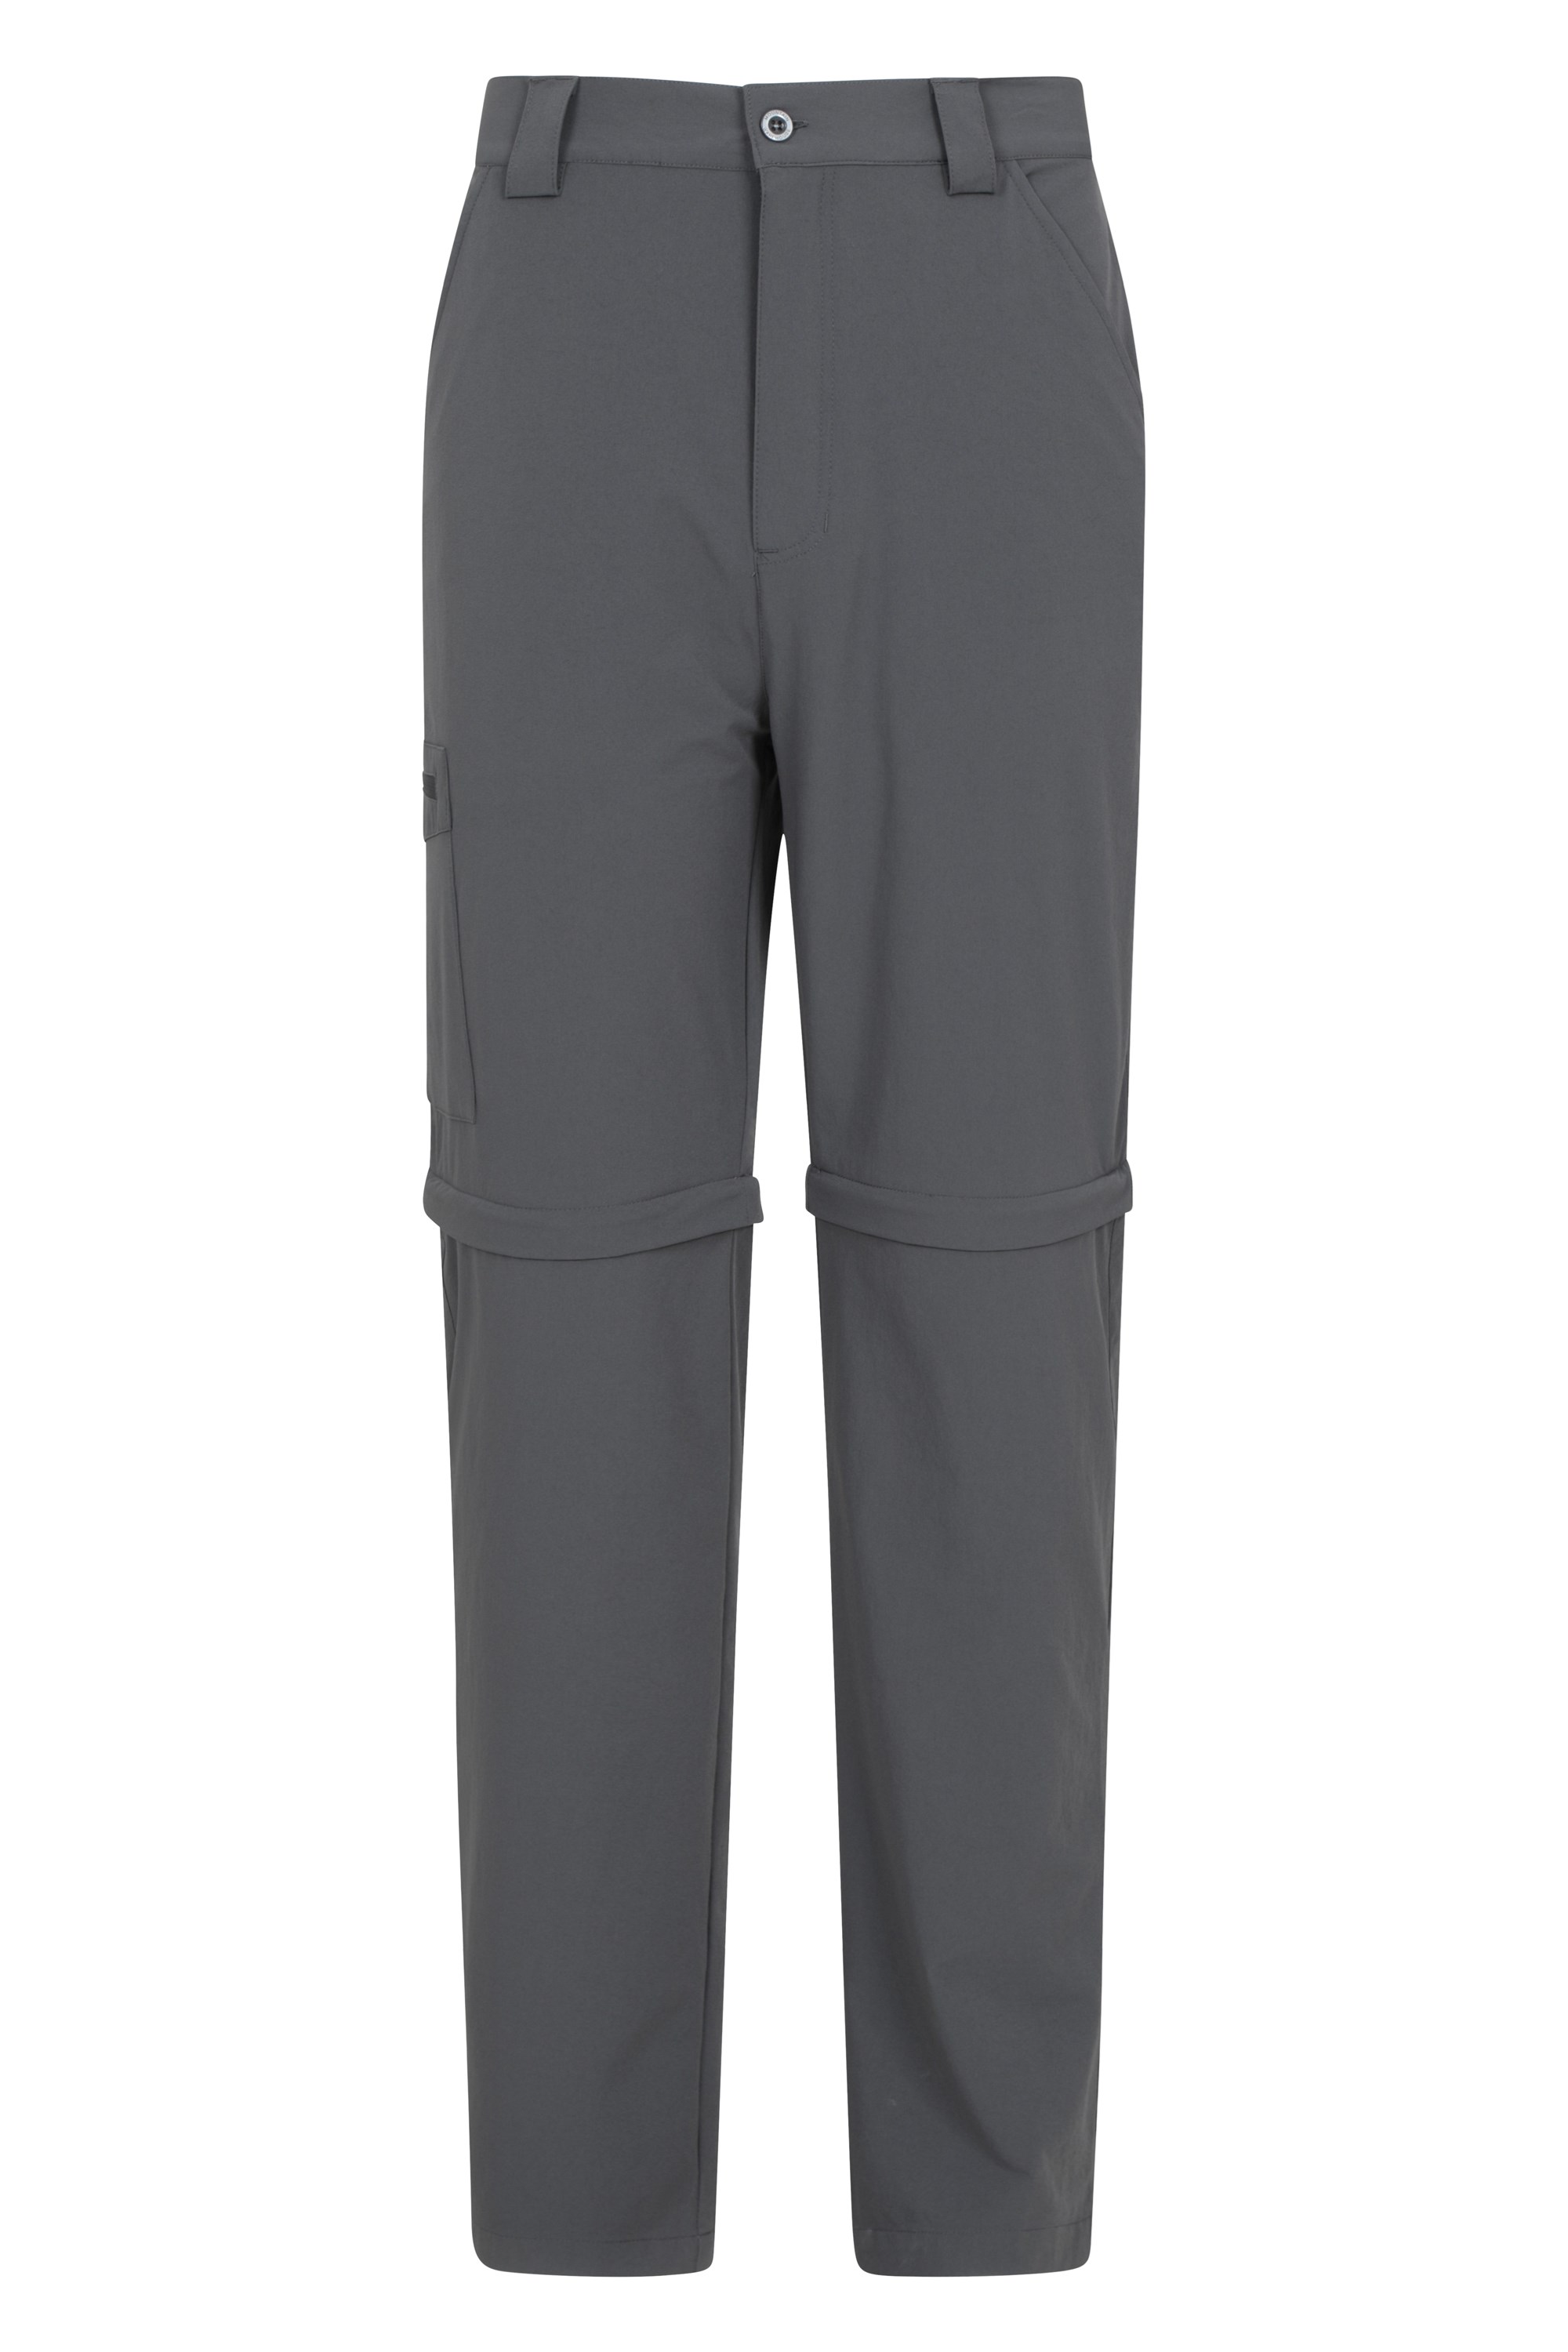 Beam Mens Zip-Off Stretch Trousers - Grey